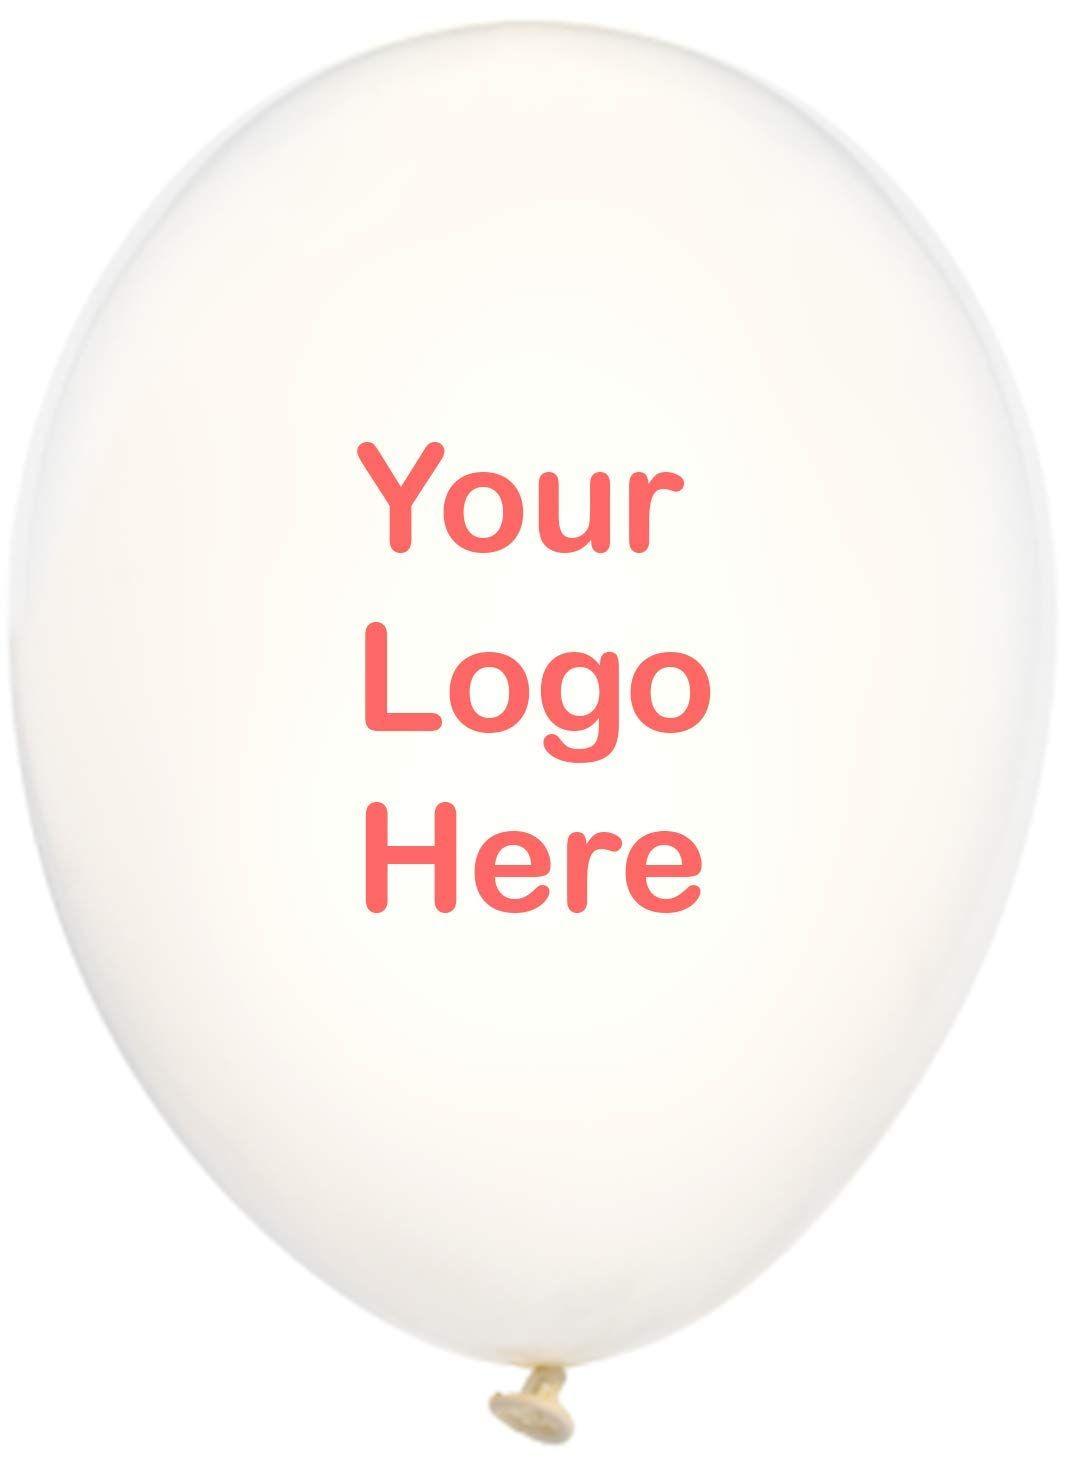 Balloons Logo - Promotional Balloons 1000 Quantity 0.129 Each Custom Logo Balloons Printed With Your